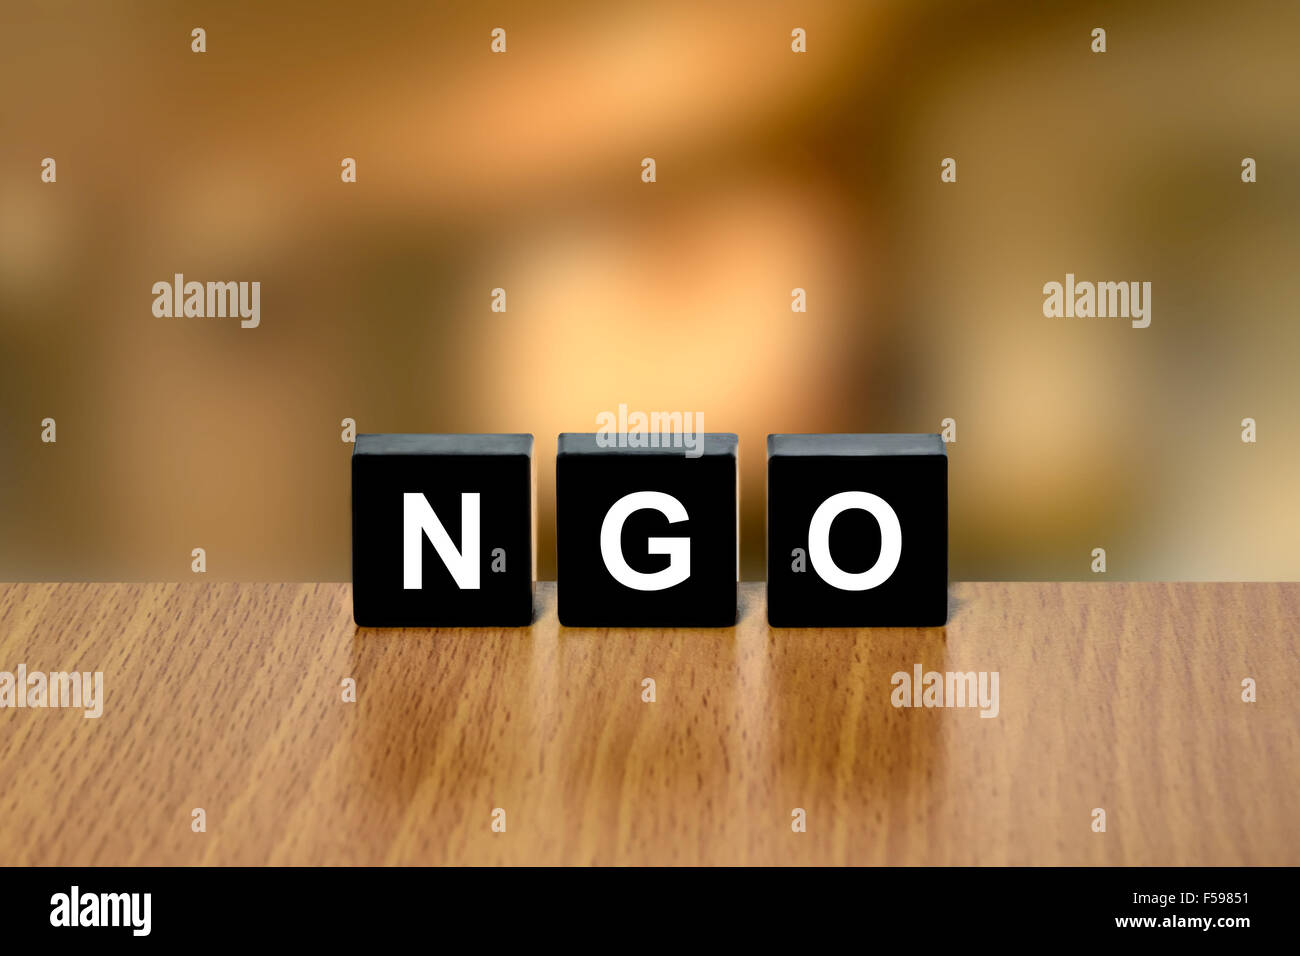 NGO or non-governmental organization on black block with blurred background Stock Photo